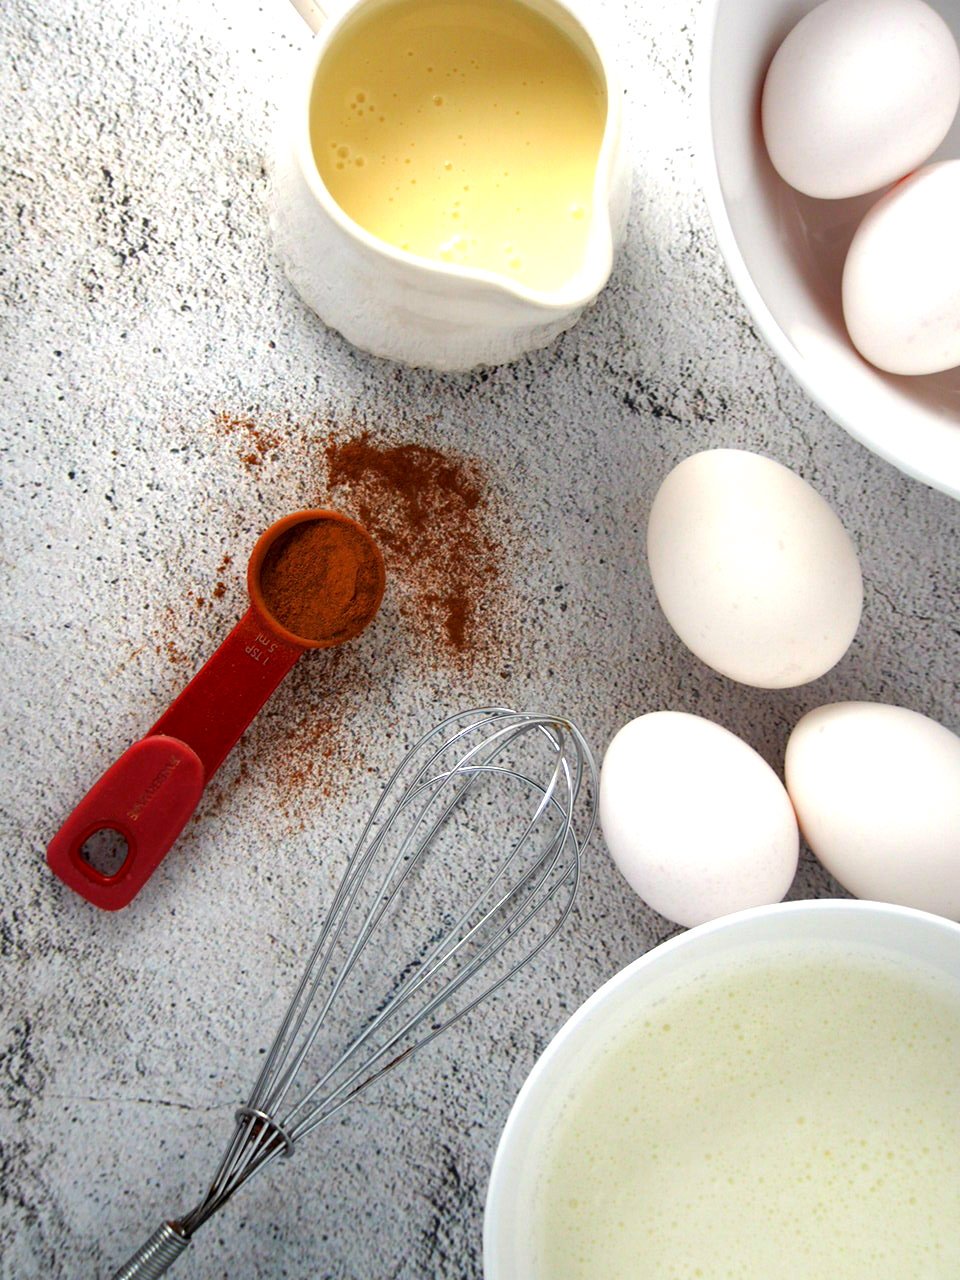 Some of the ingredients for making Cinnamon Flan: cinnamon, eggs, condensed milk and cream.